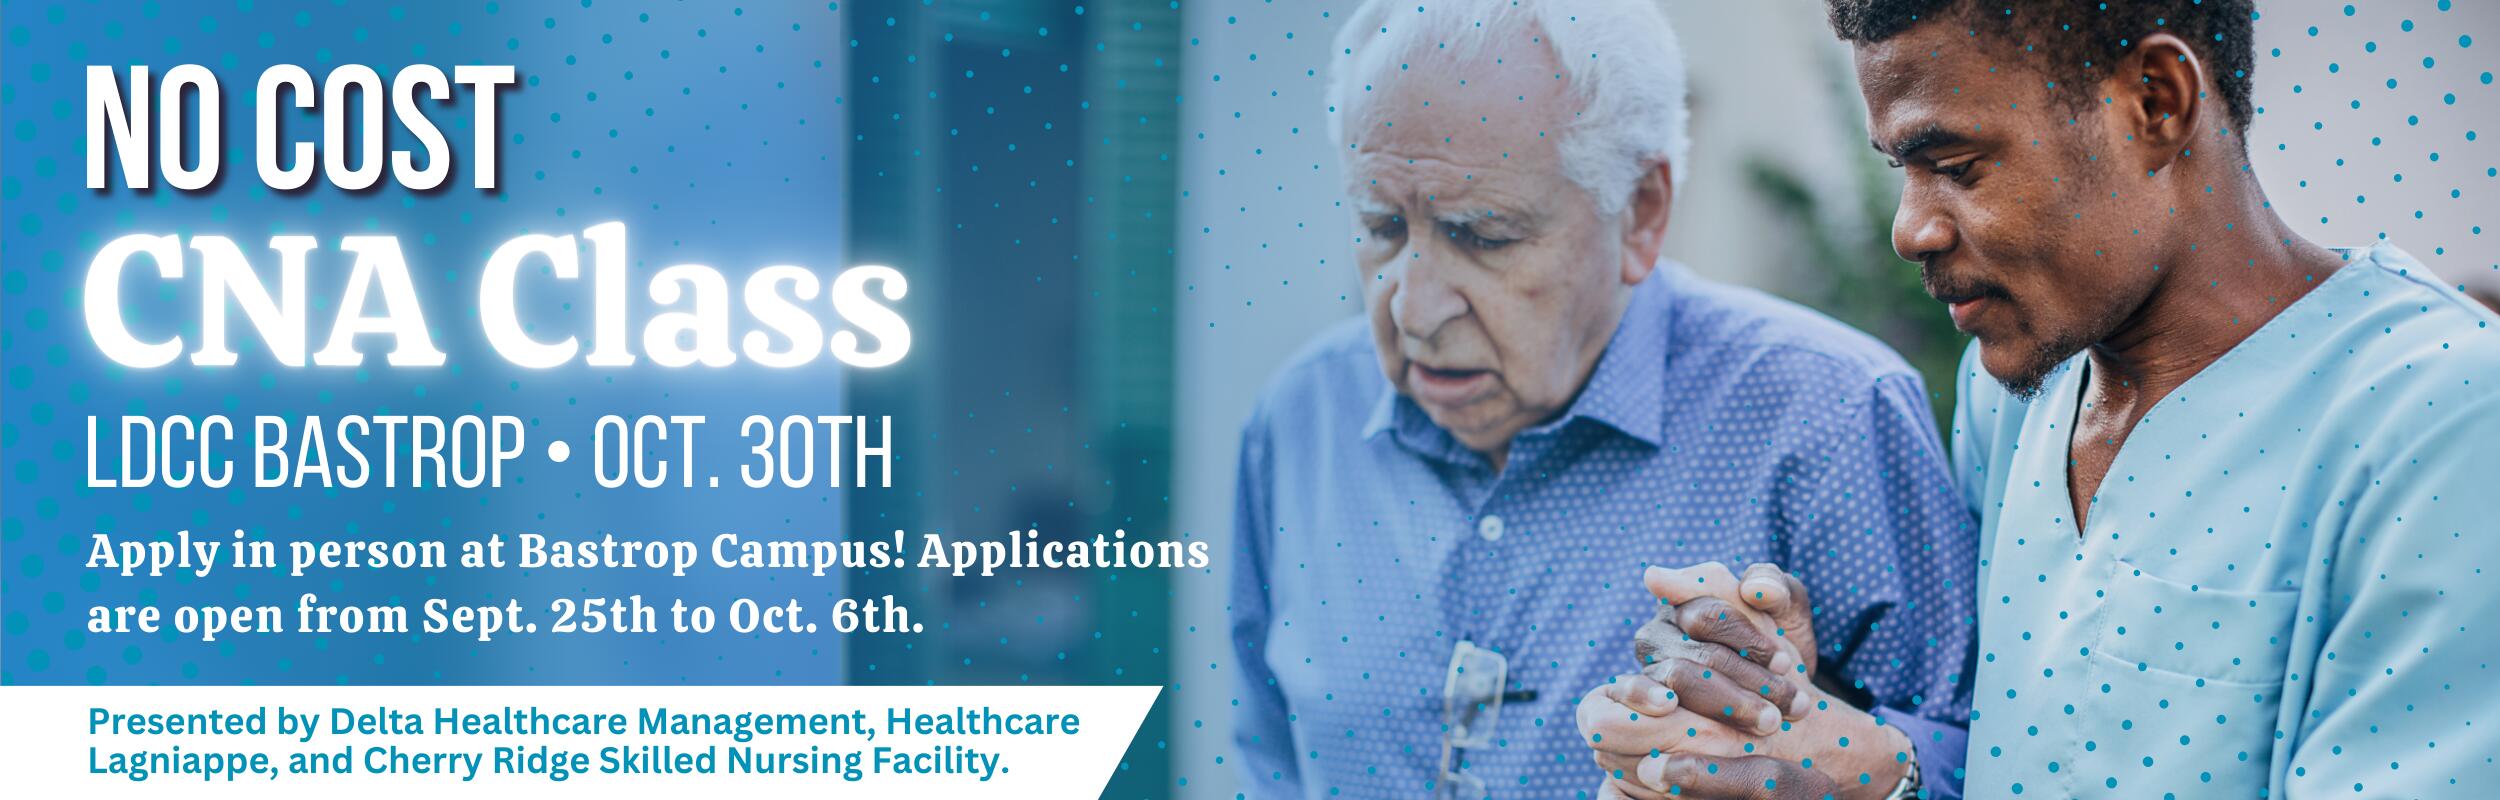 A male CNA assisting an elderly man with overlaying text: No cost CNA Class. LDCC Bastrop. October 30th. Apply in person at Bastrop Campus! Applications are open from September 25th to October 6th. Presented by Delta Healthcare Management, Healthcare Lagniappe, and Cherry Ridge Skilled Nursing Facility.